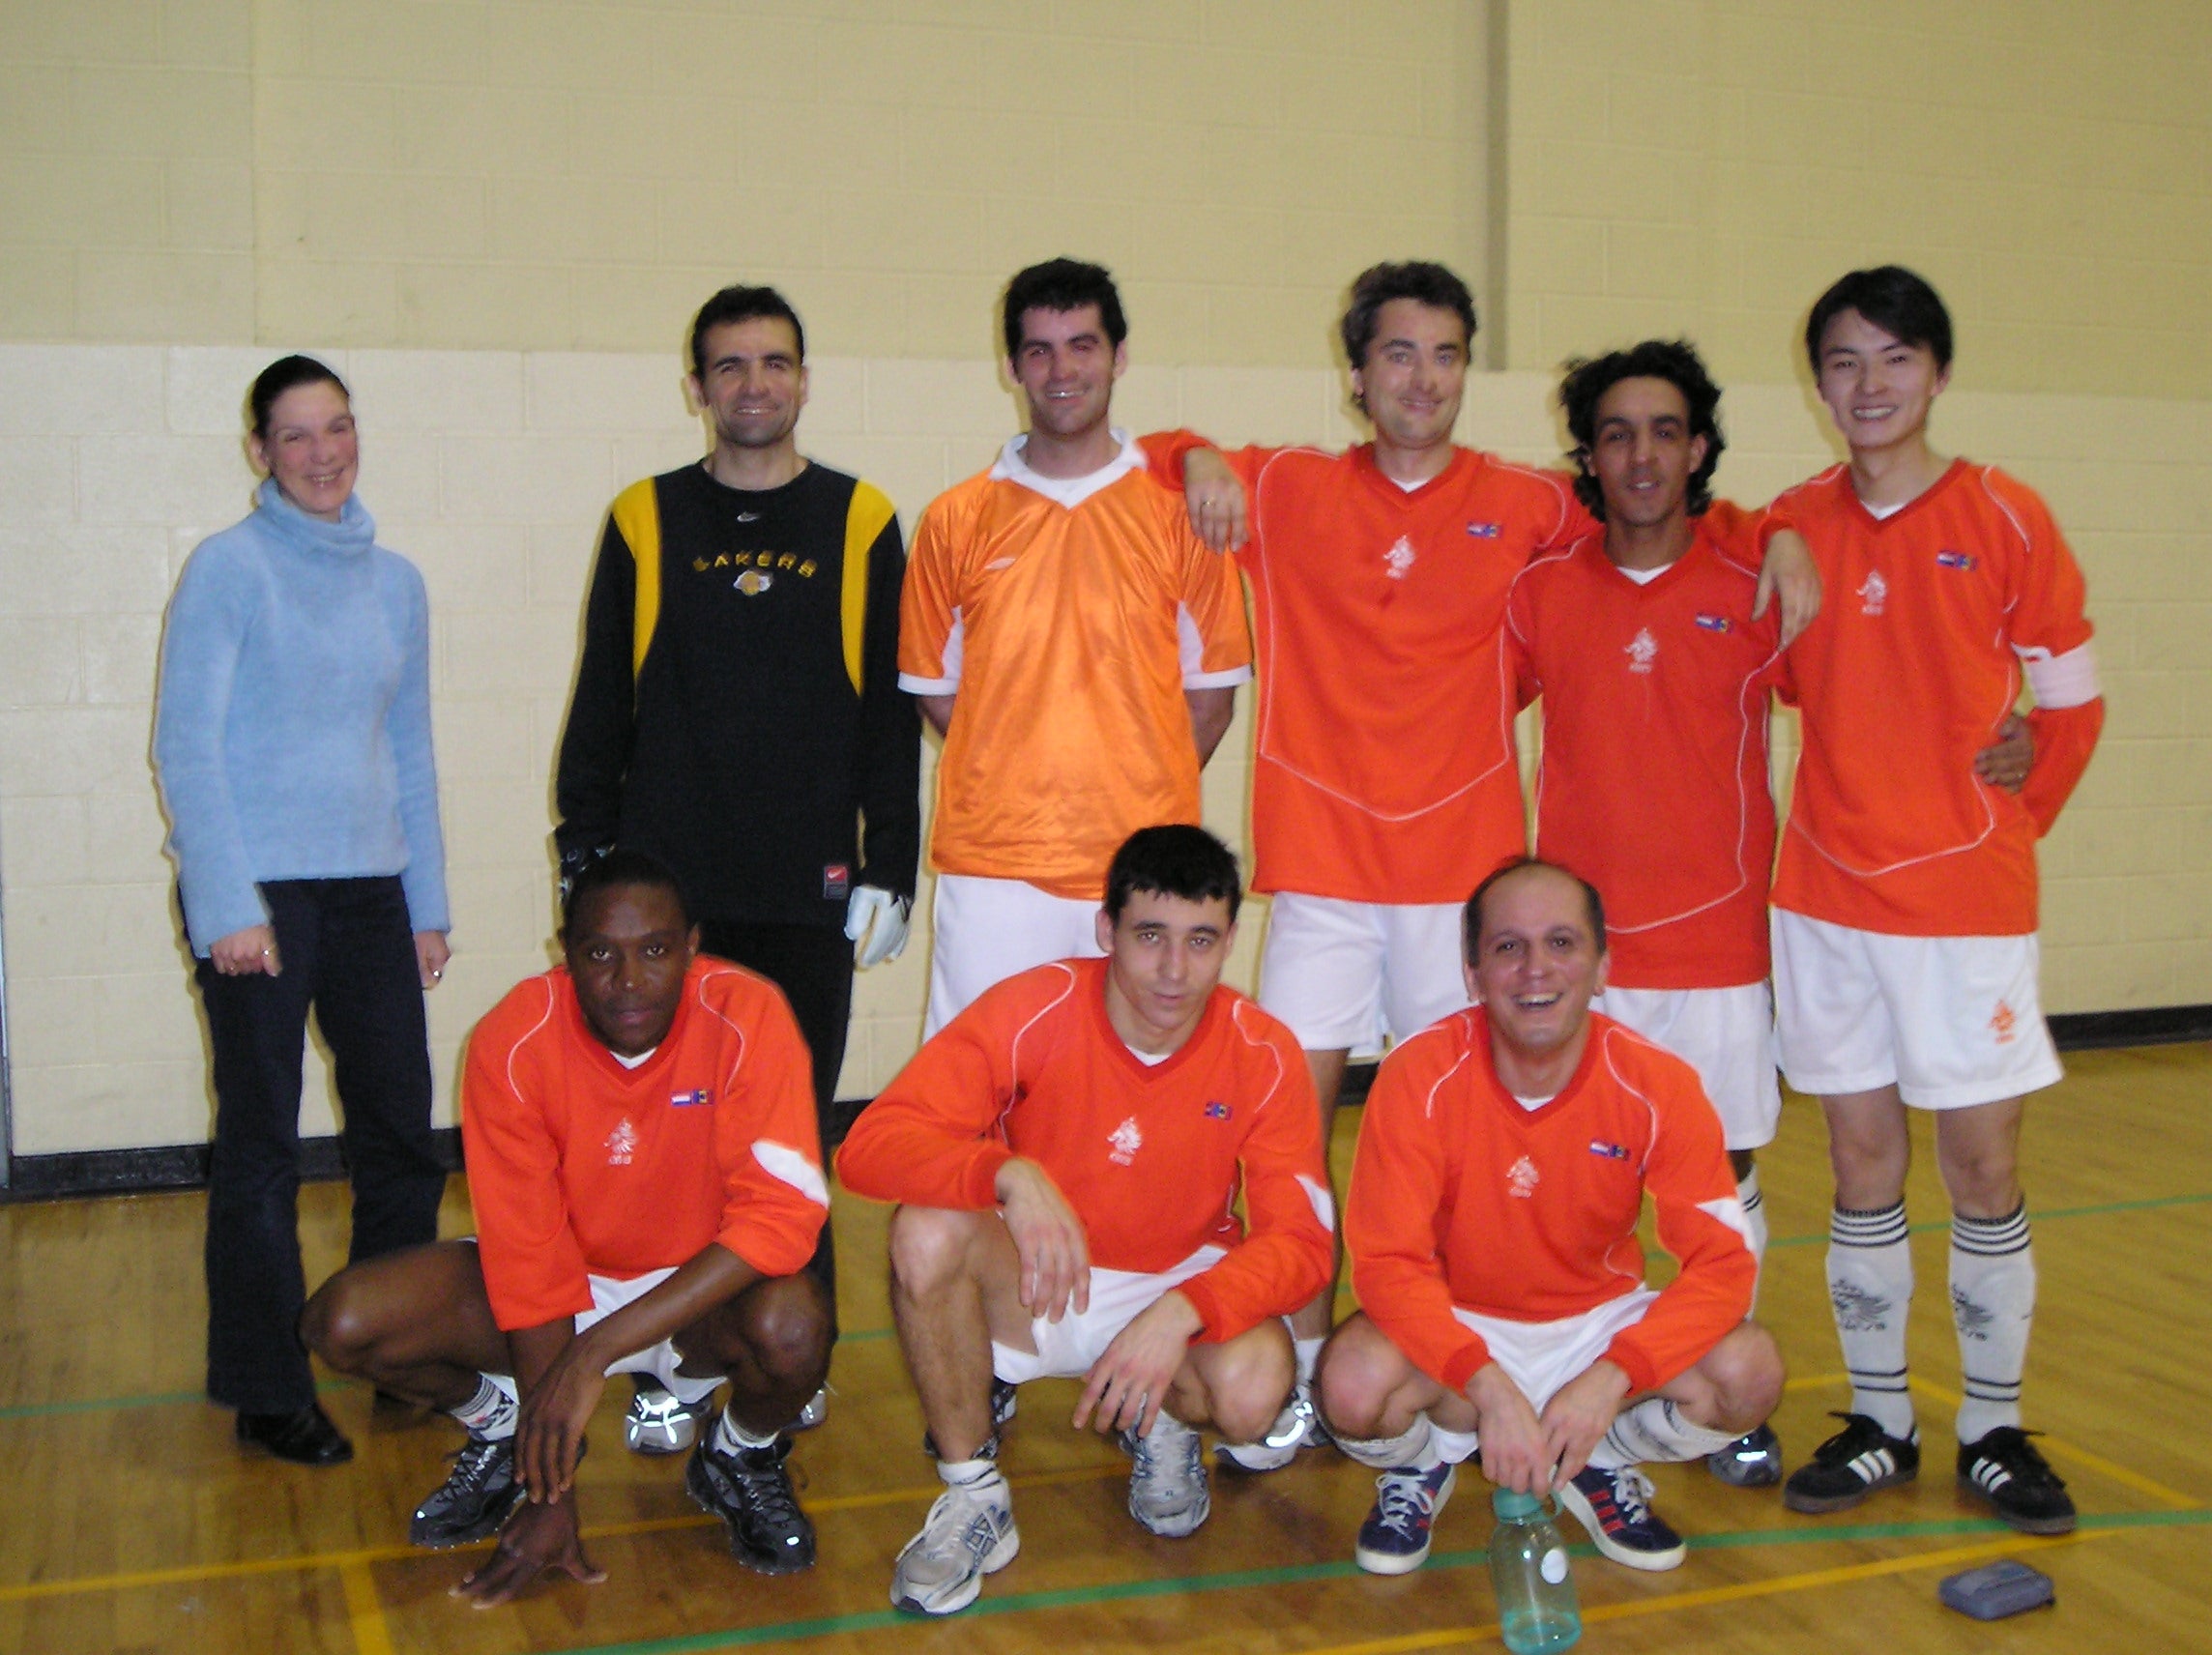 February 2005: soccer team. Standing, from left to right: Katja, Navid, Jon, Holger, Jalil, Jackie. Sitting, from left to right: Jean Paul, guest, Shahab.